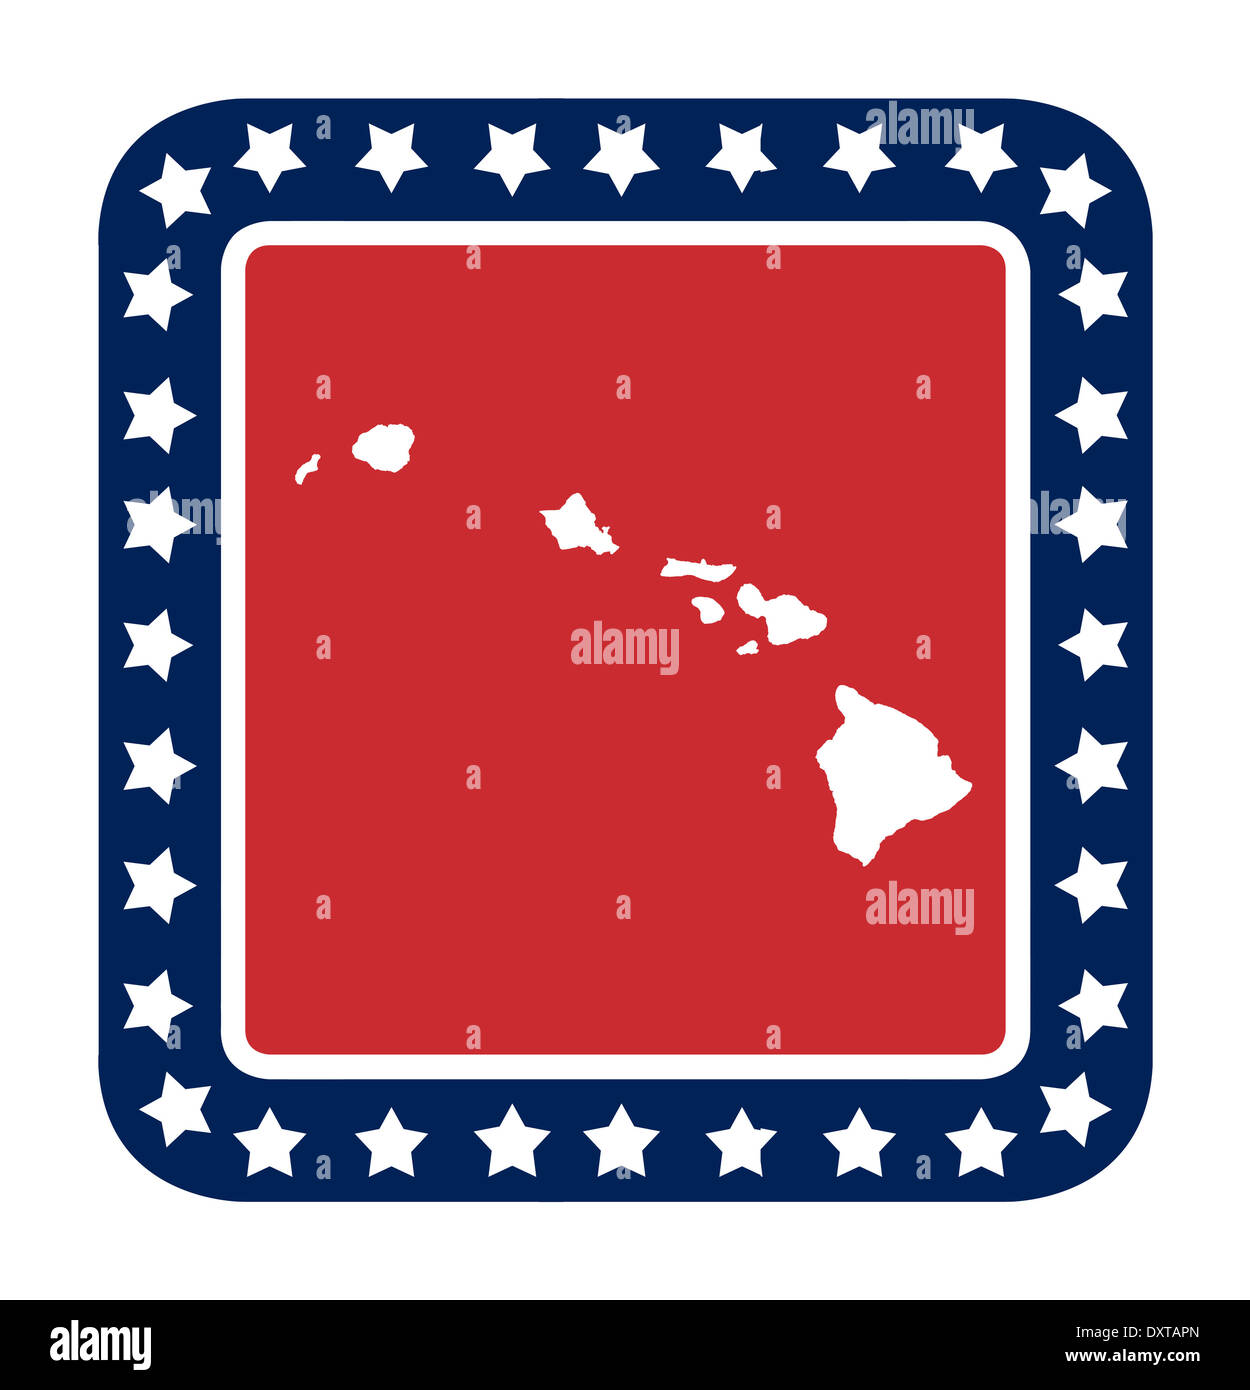 Hawaii state button on American flag in flat web design style, isolated on white background. Stock Photo